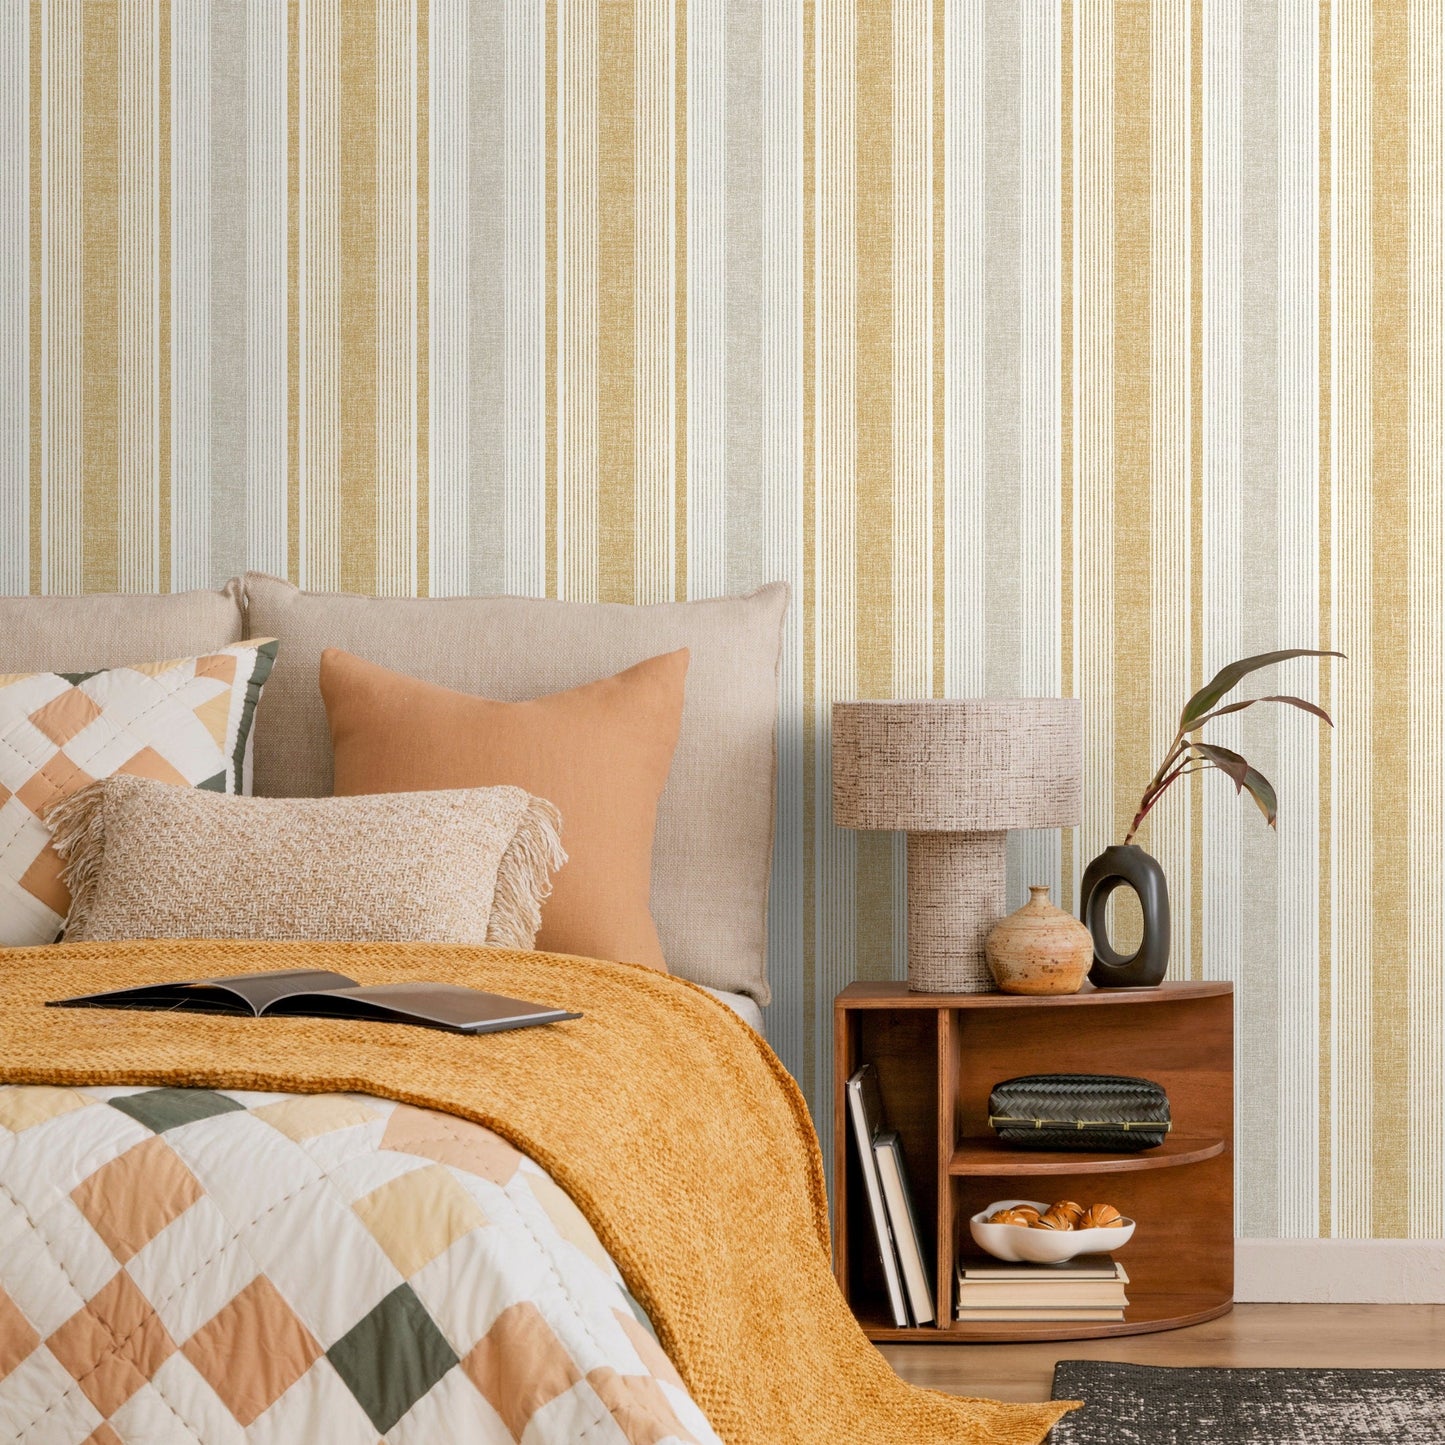 Textured Striped Wallpaper Yellow and Grey Wallpaper Peel and Stick and Traditional Wallpaper - D840